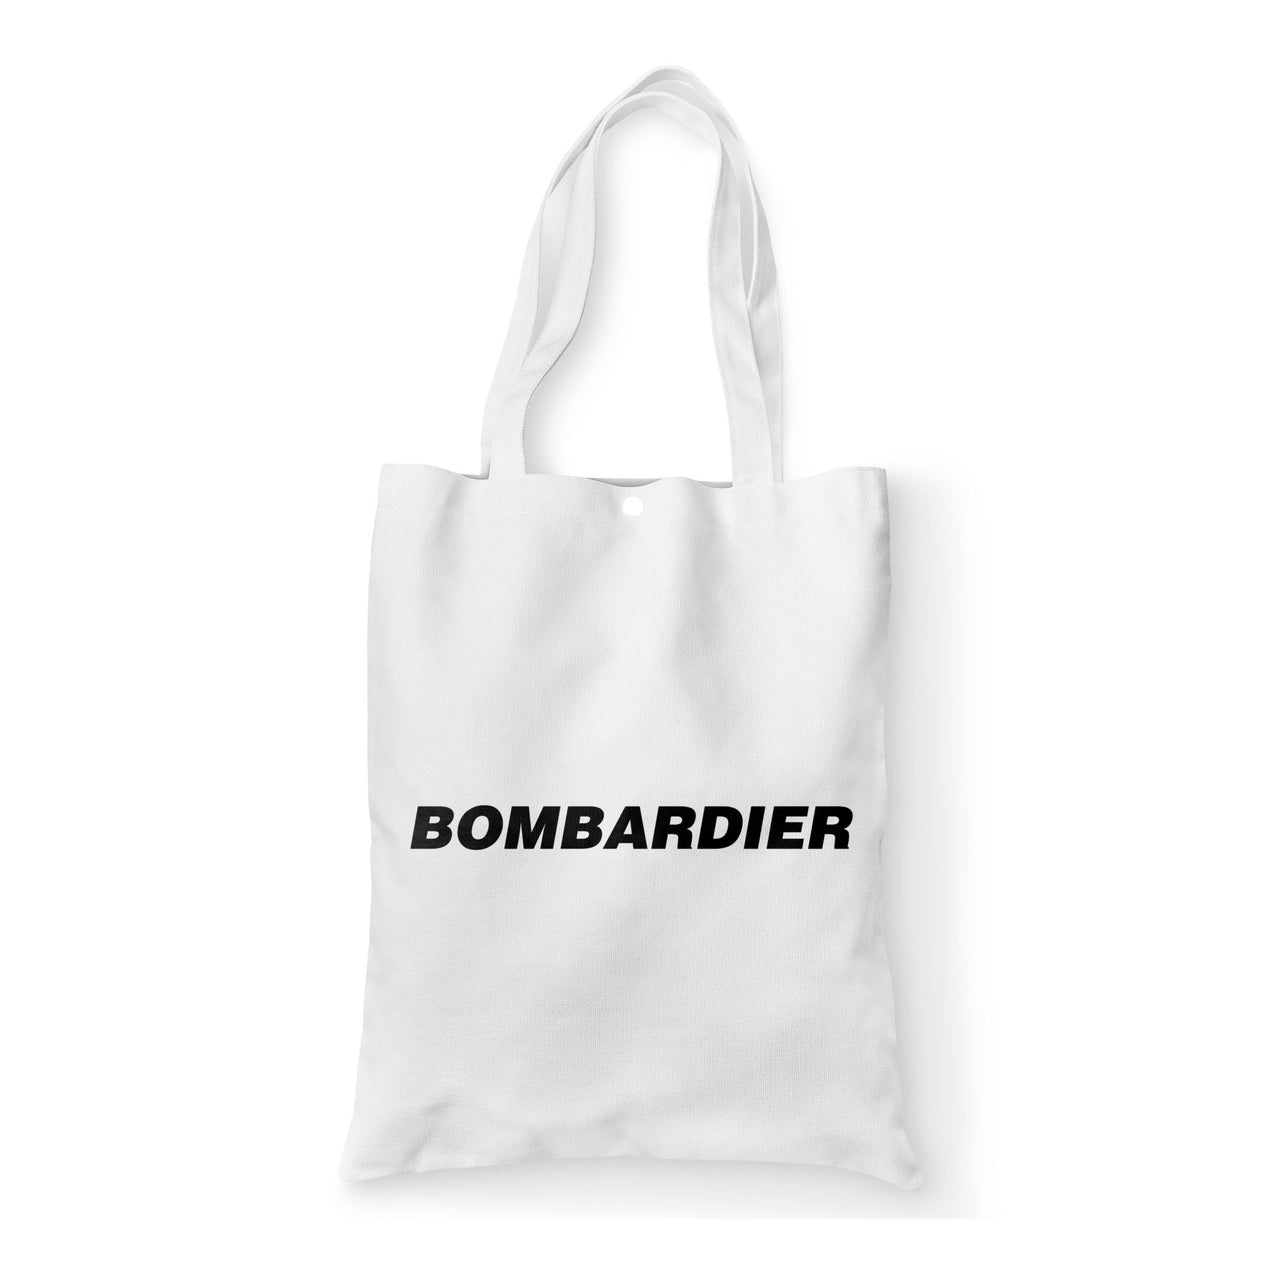 Bombardier & Text Designed Tote Bags